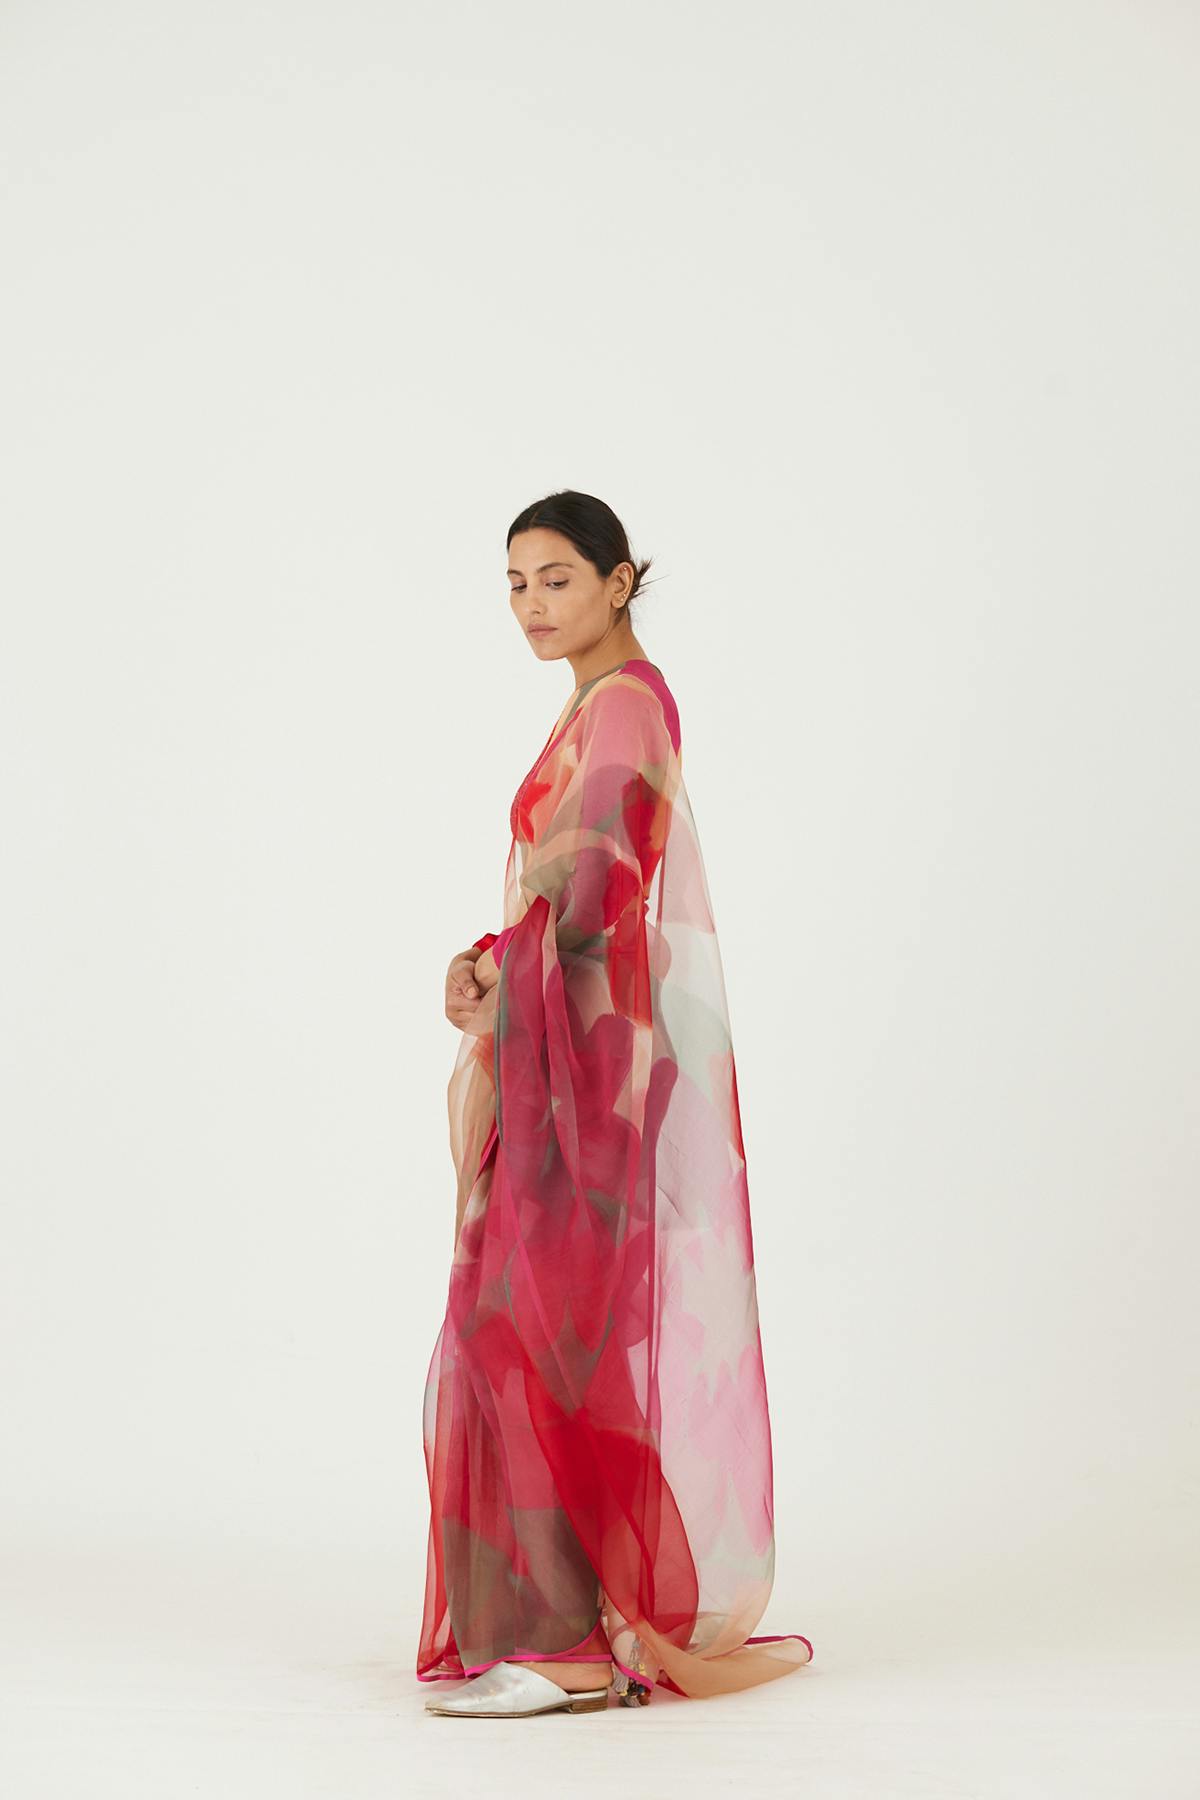 Additional image of LEI LANI RED SAREE, a product by Yam India